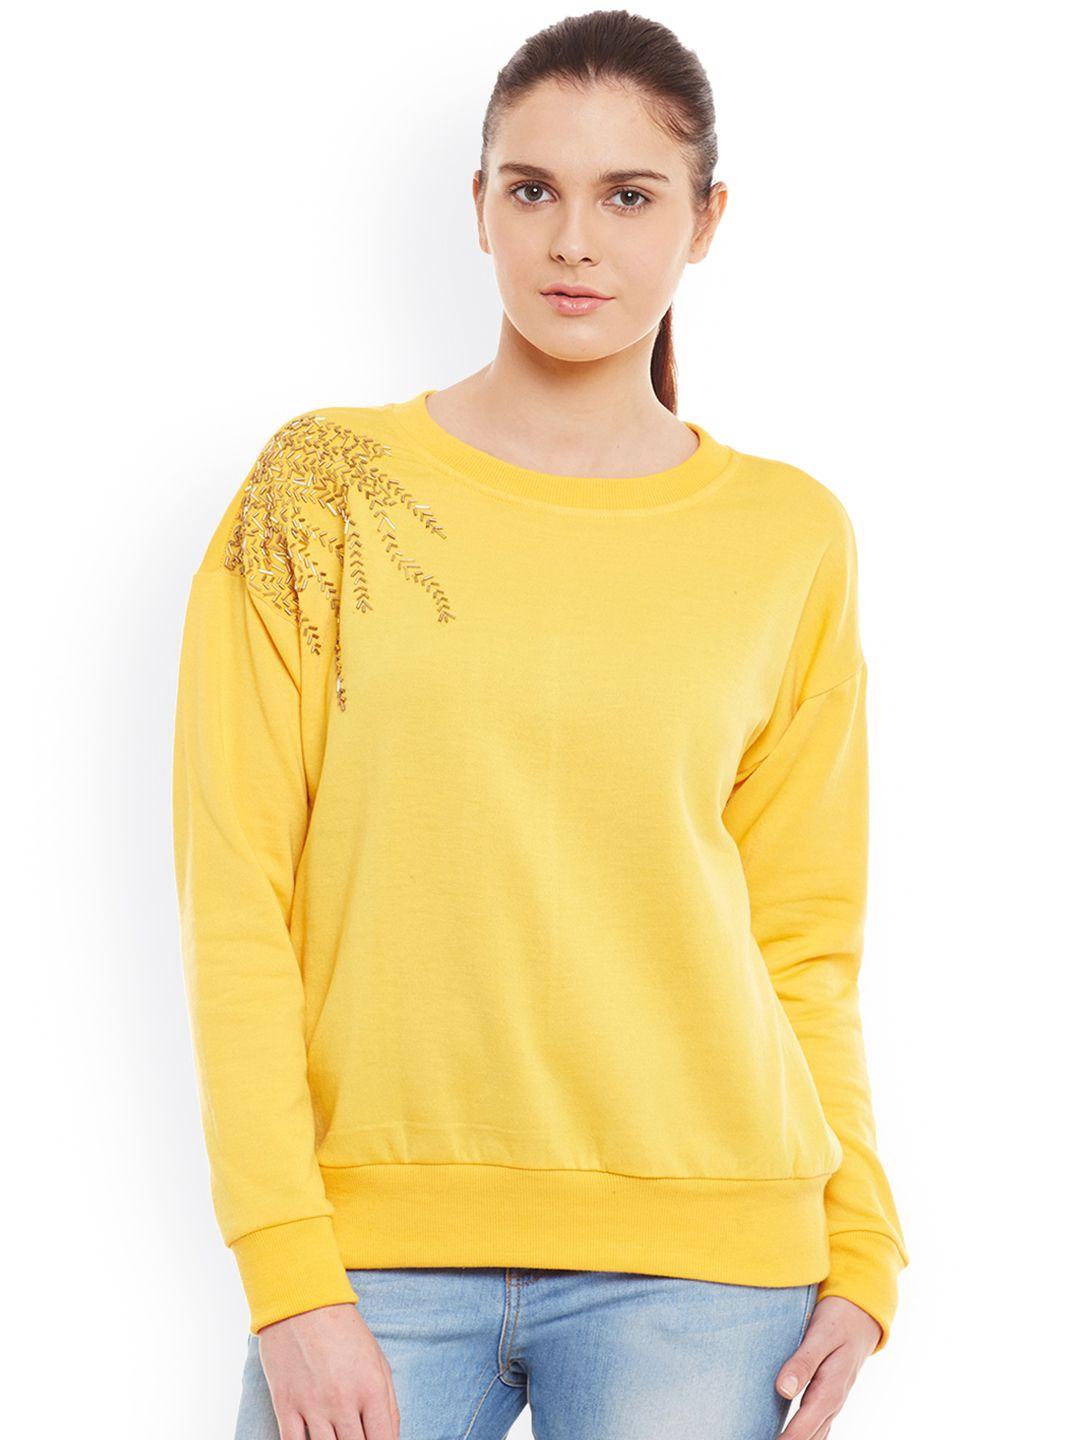 belle fille yellow sweatshirt with embellished detail